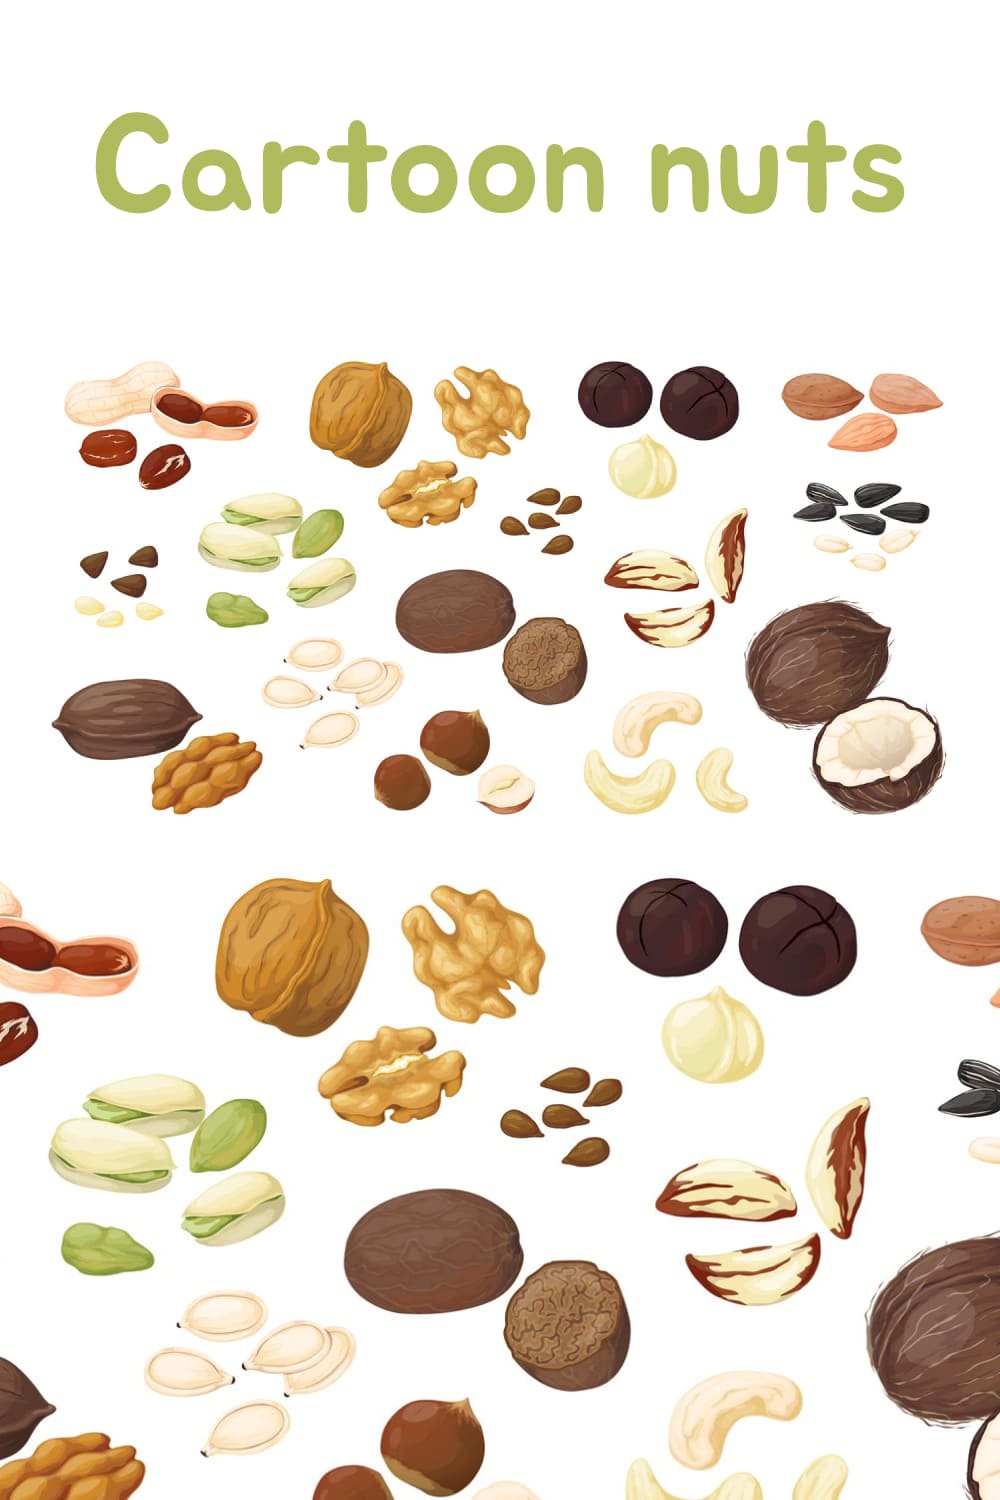 Nuts are drawn in a cartoon style.